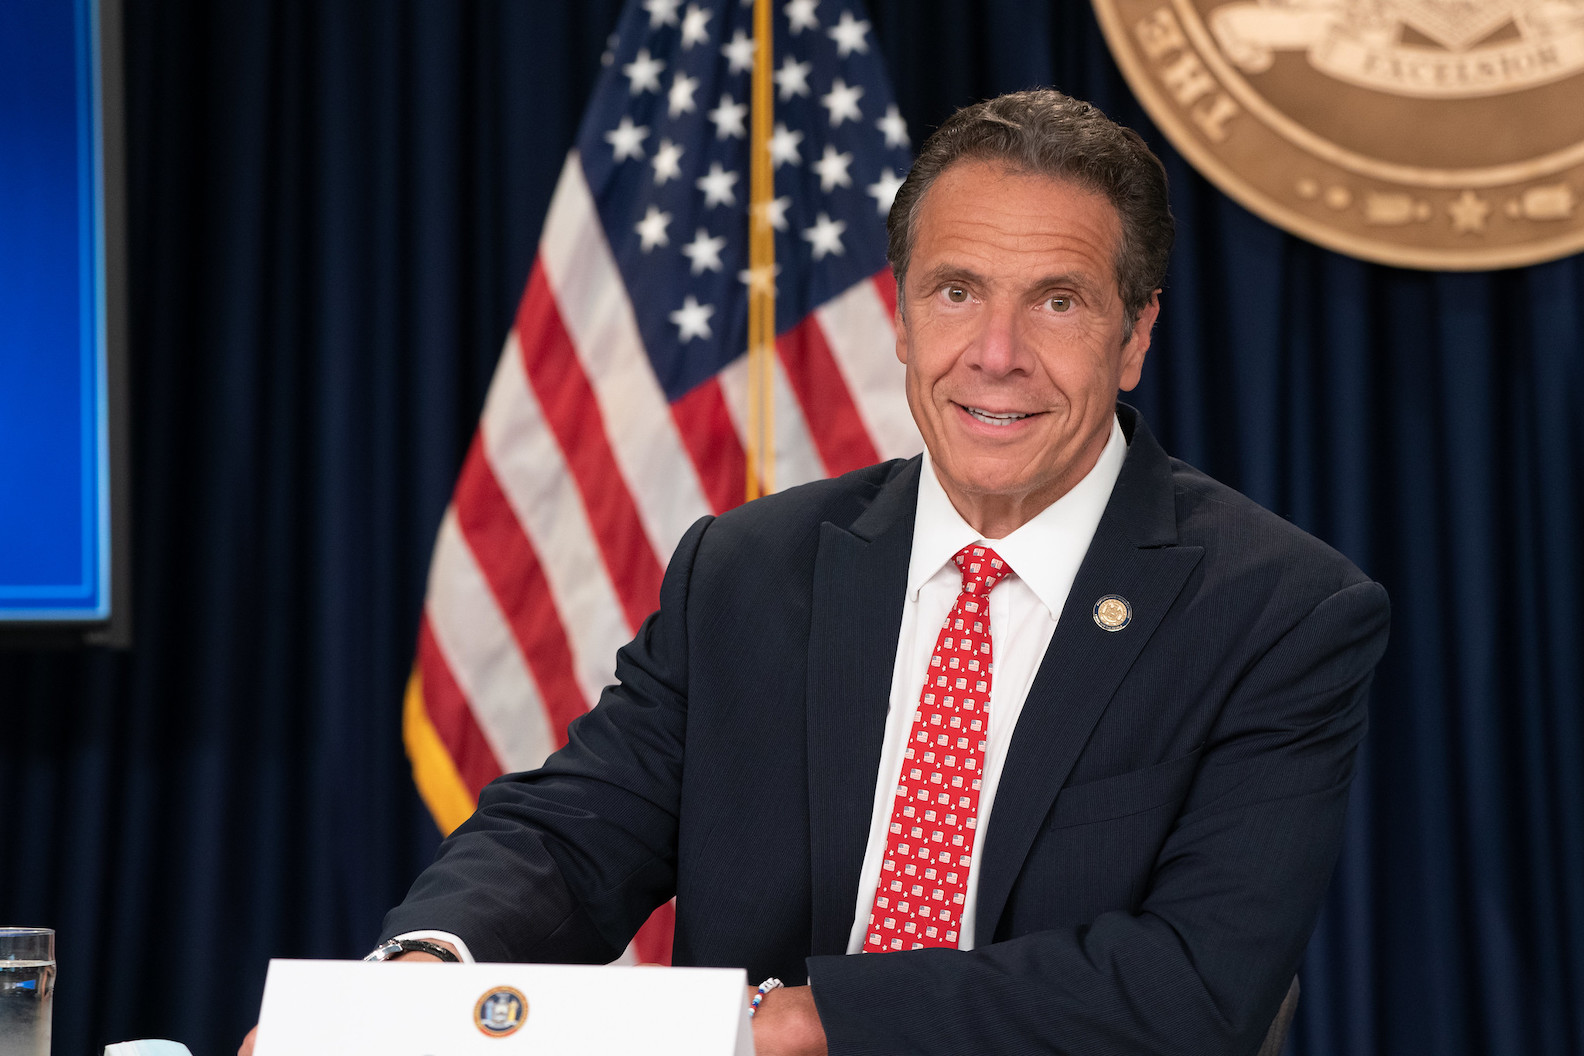 Gov. Andrew Cuomo held his daily coronavirus briefing Thursday with New York State Health Commissioner Dr. Howard Zucker, Secretary to the Governor Melissa DeRosa and Director of the Budget Robert Mujica. (Image courtesy of the Office of Gov. Andrew M. Cuomo)